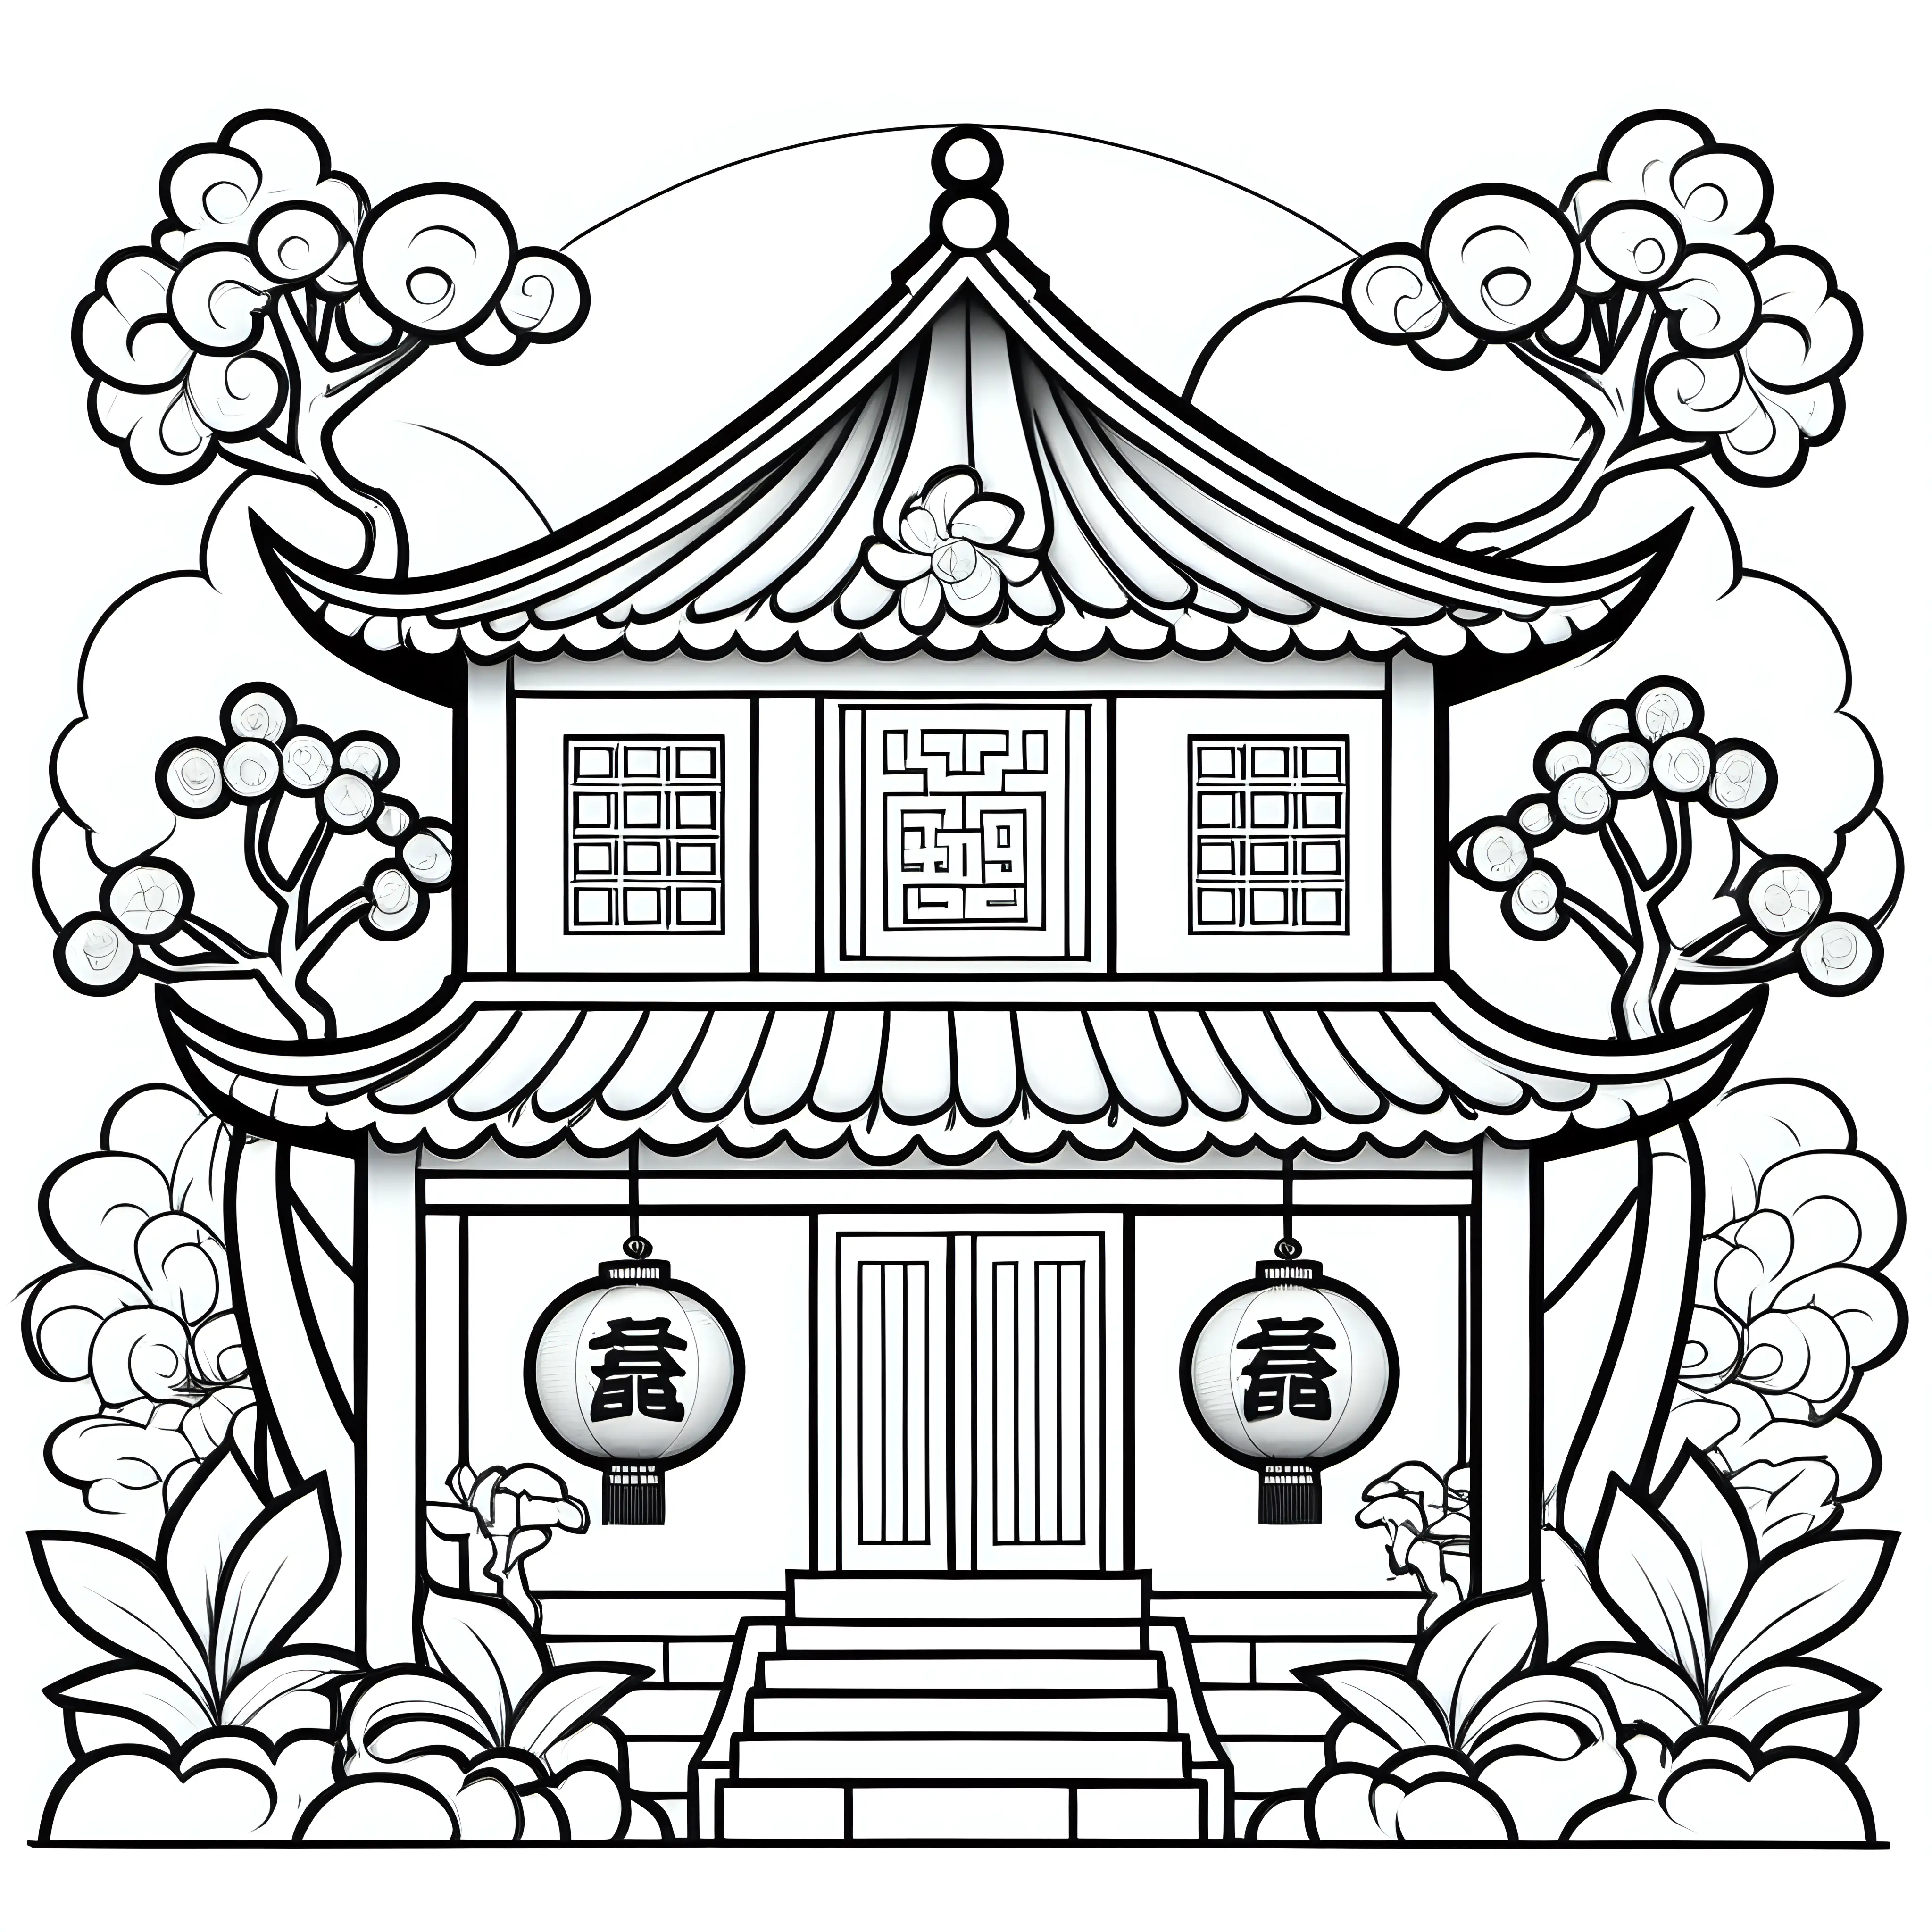 basic kids colouring book page, house with Chinese new year decoration, lunar new year,  cartoon style, no shading, outline only for colouring
  
